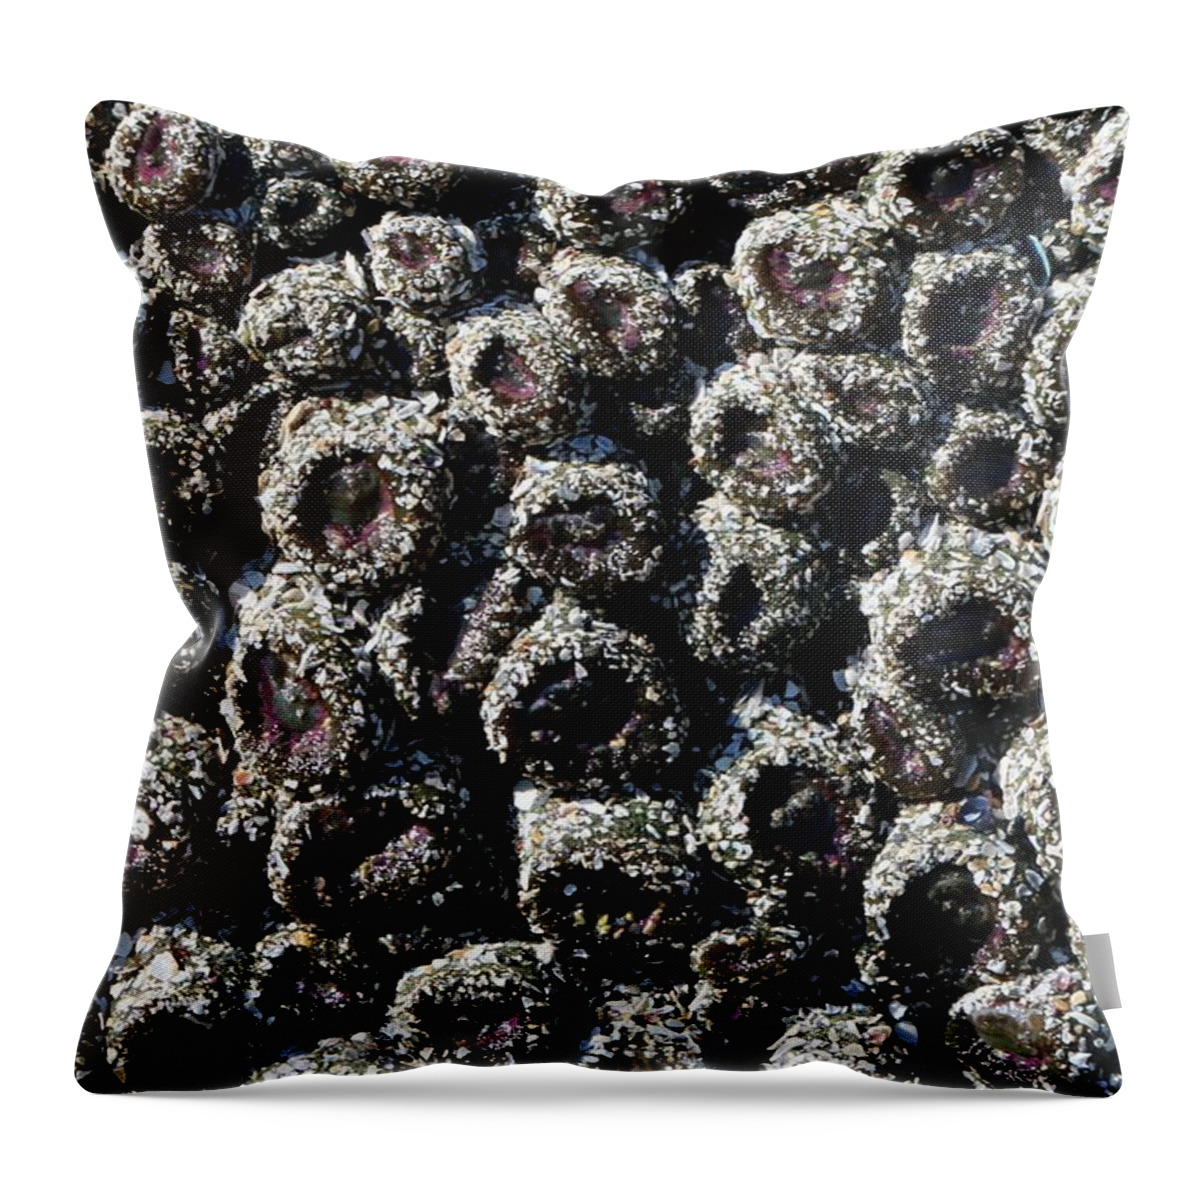 Aggregating Anemones Throw Pillow featuring the photograph Aggregating Anemones by Christy Pooschke